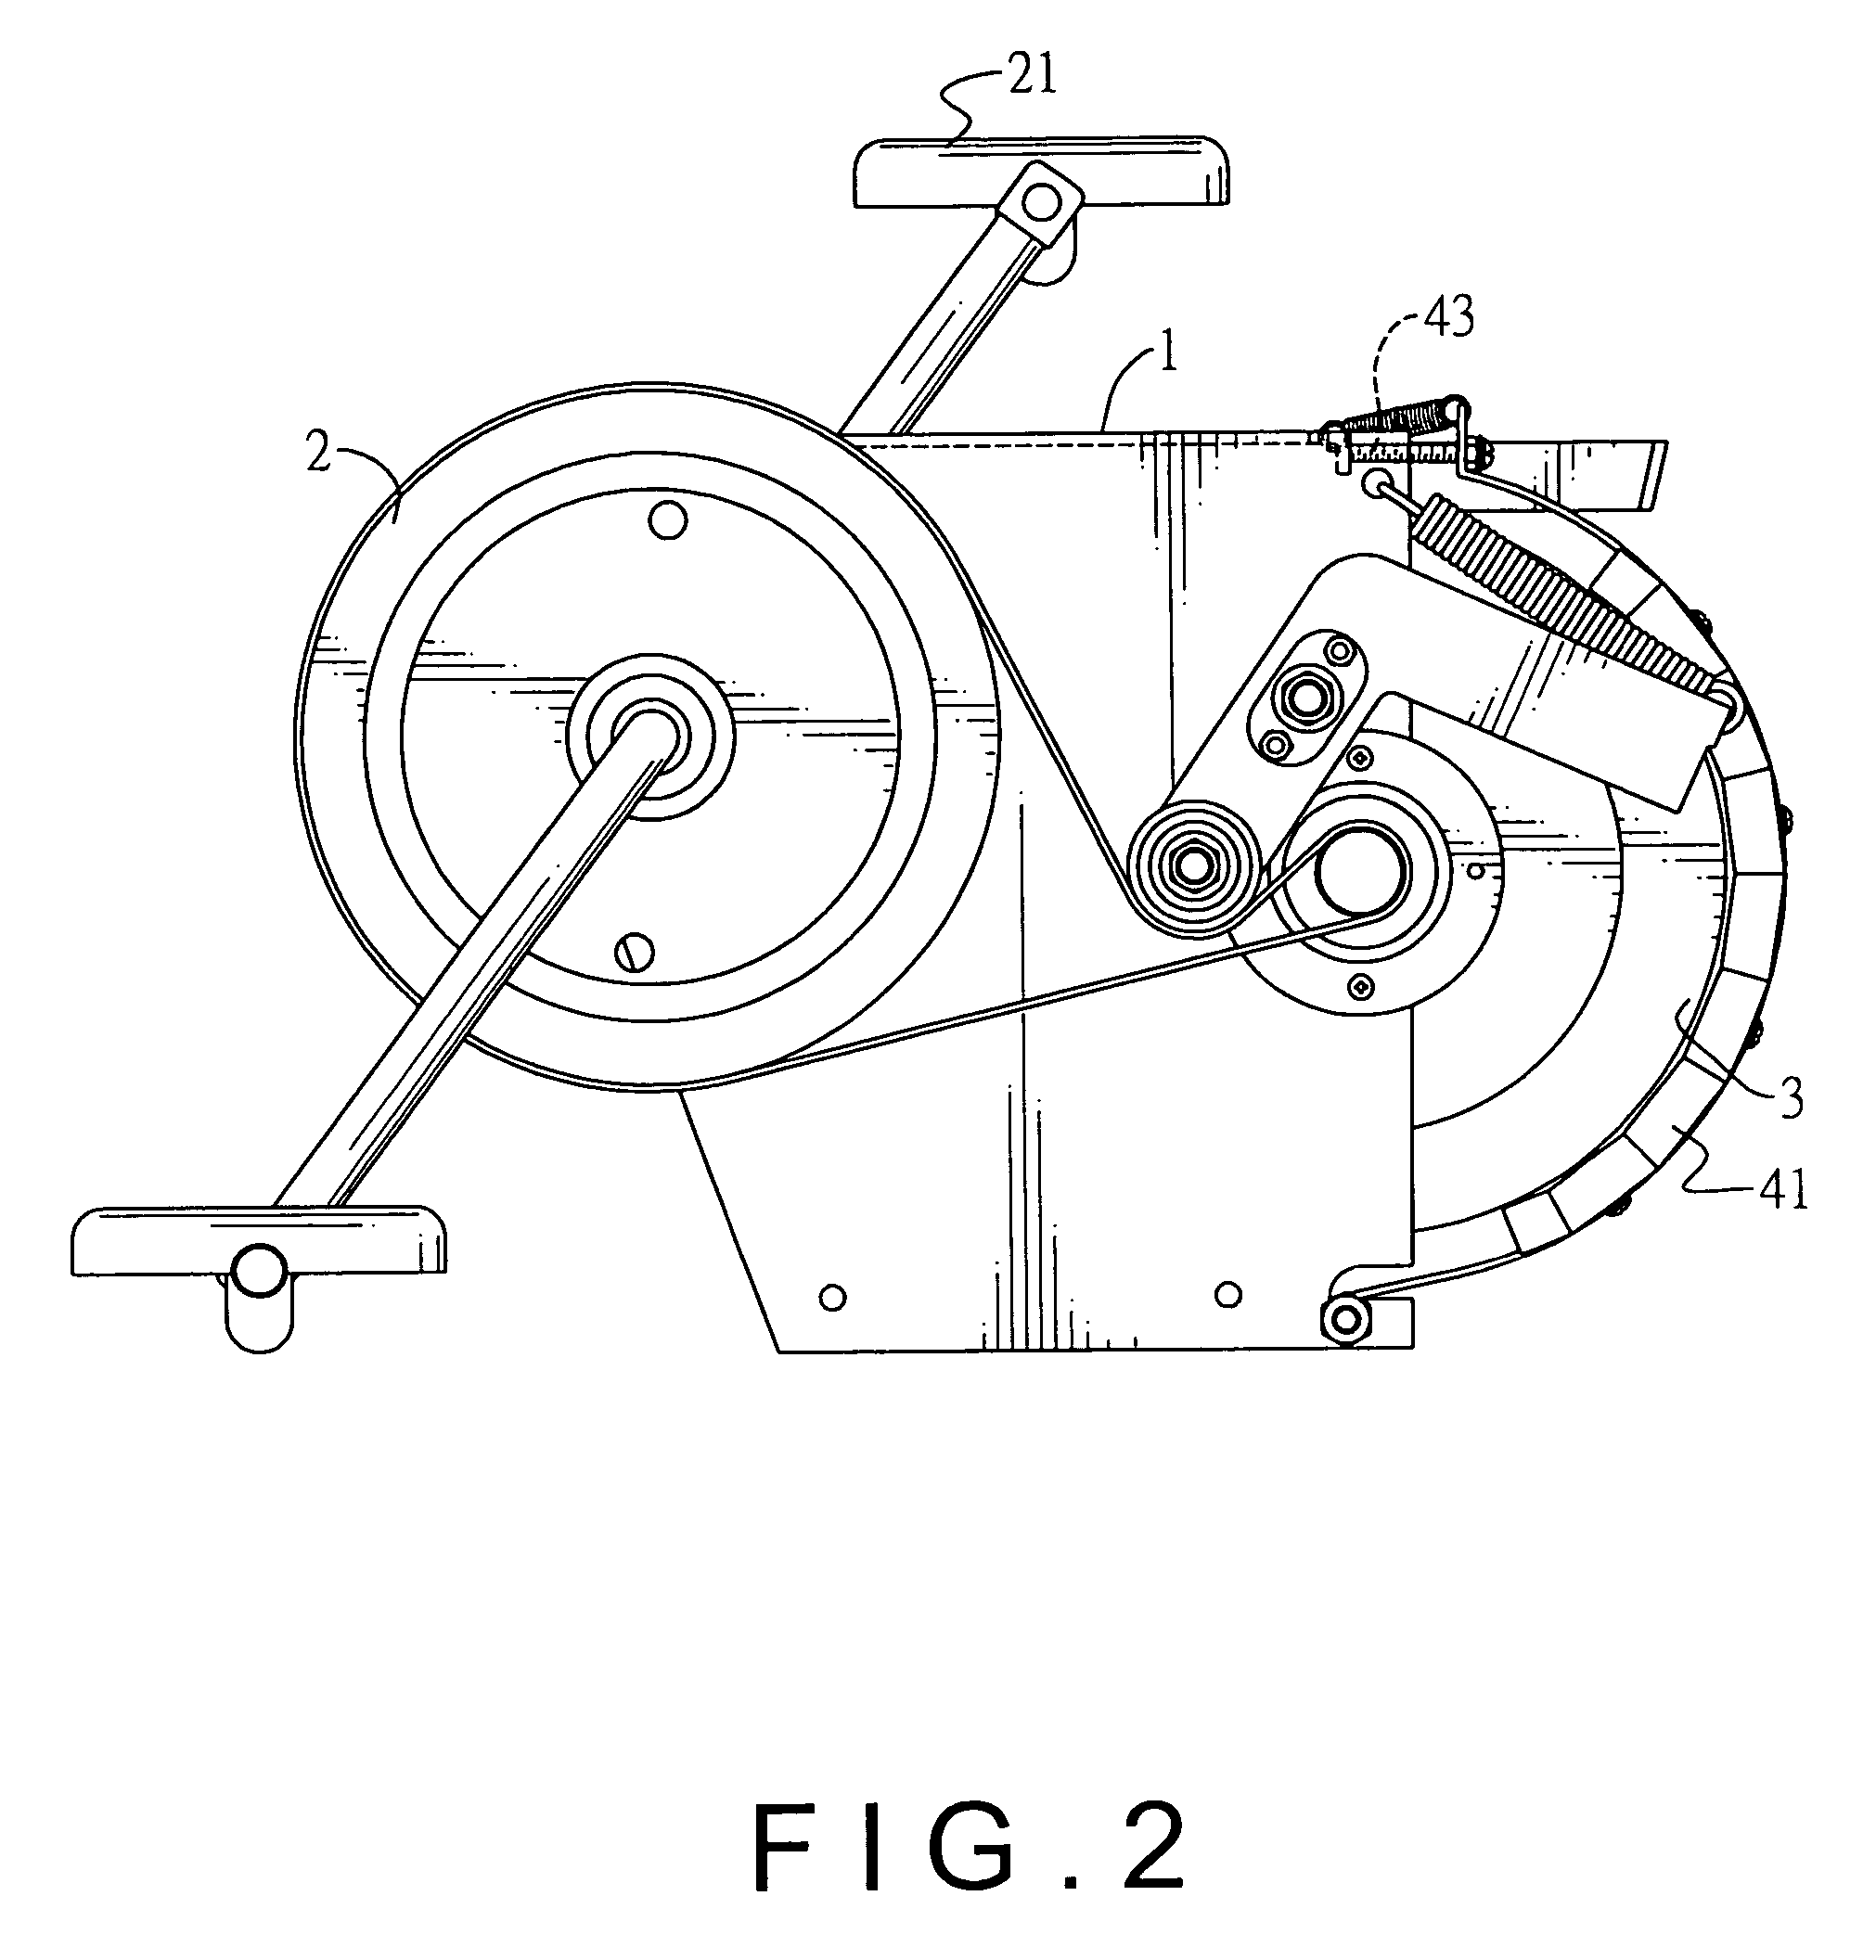 Modulated transmission assembly for an exercise bicycle